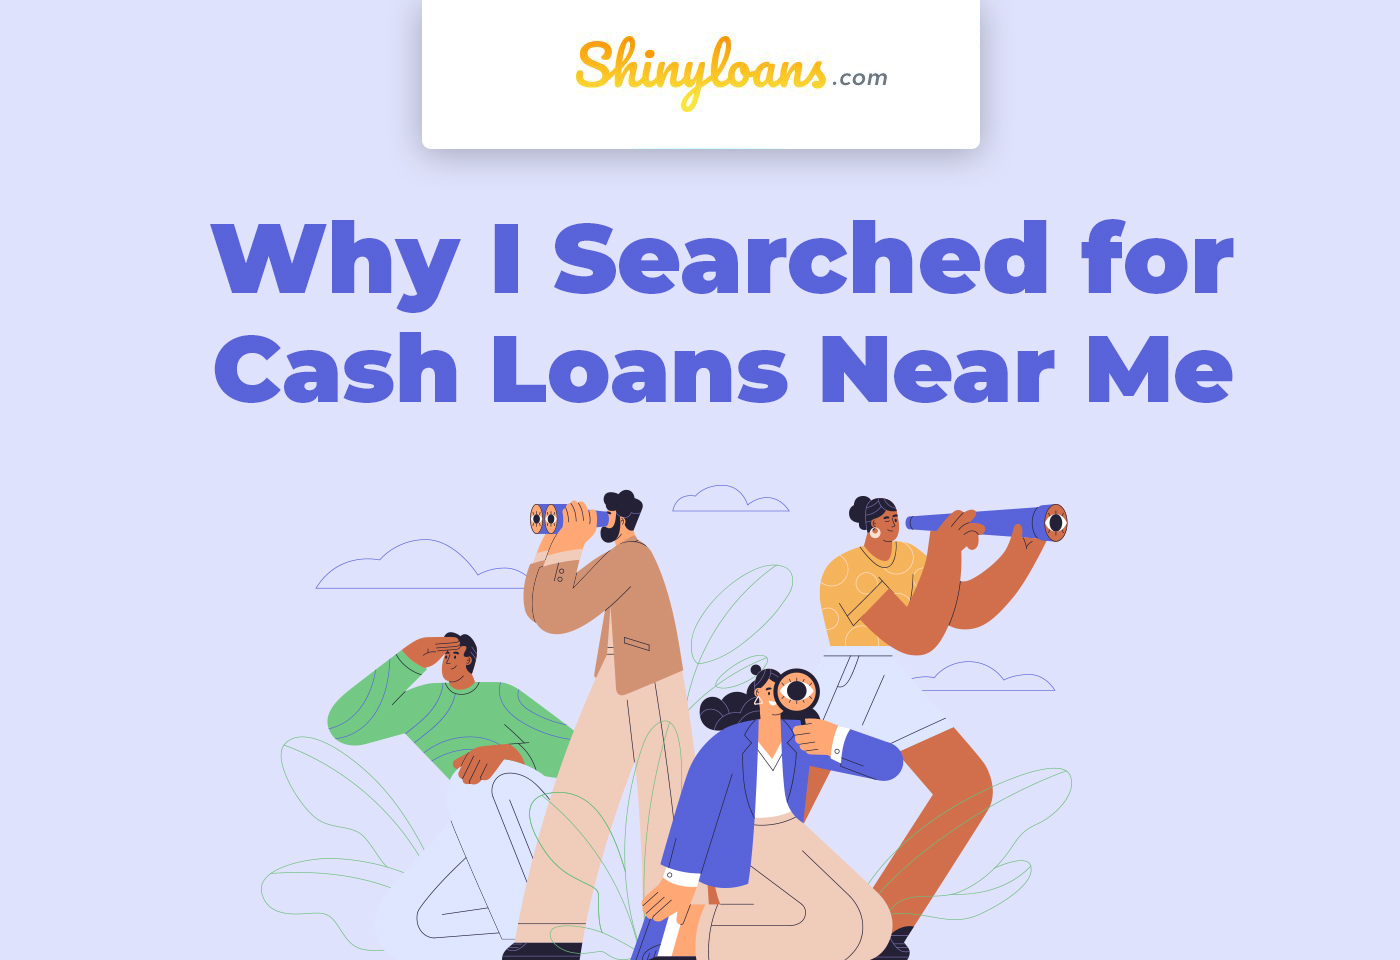 Why I Searched for Cash Loans Near Me